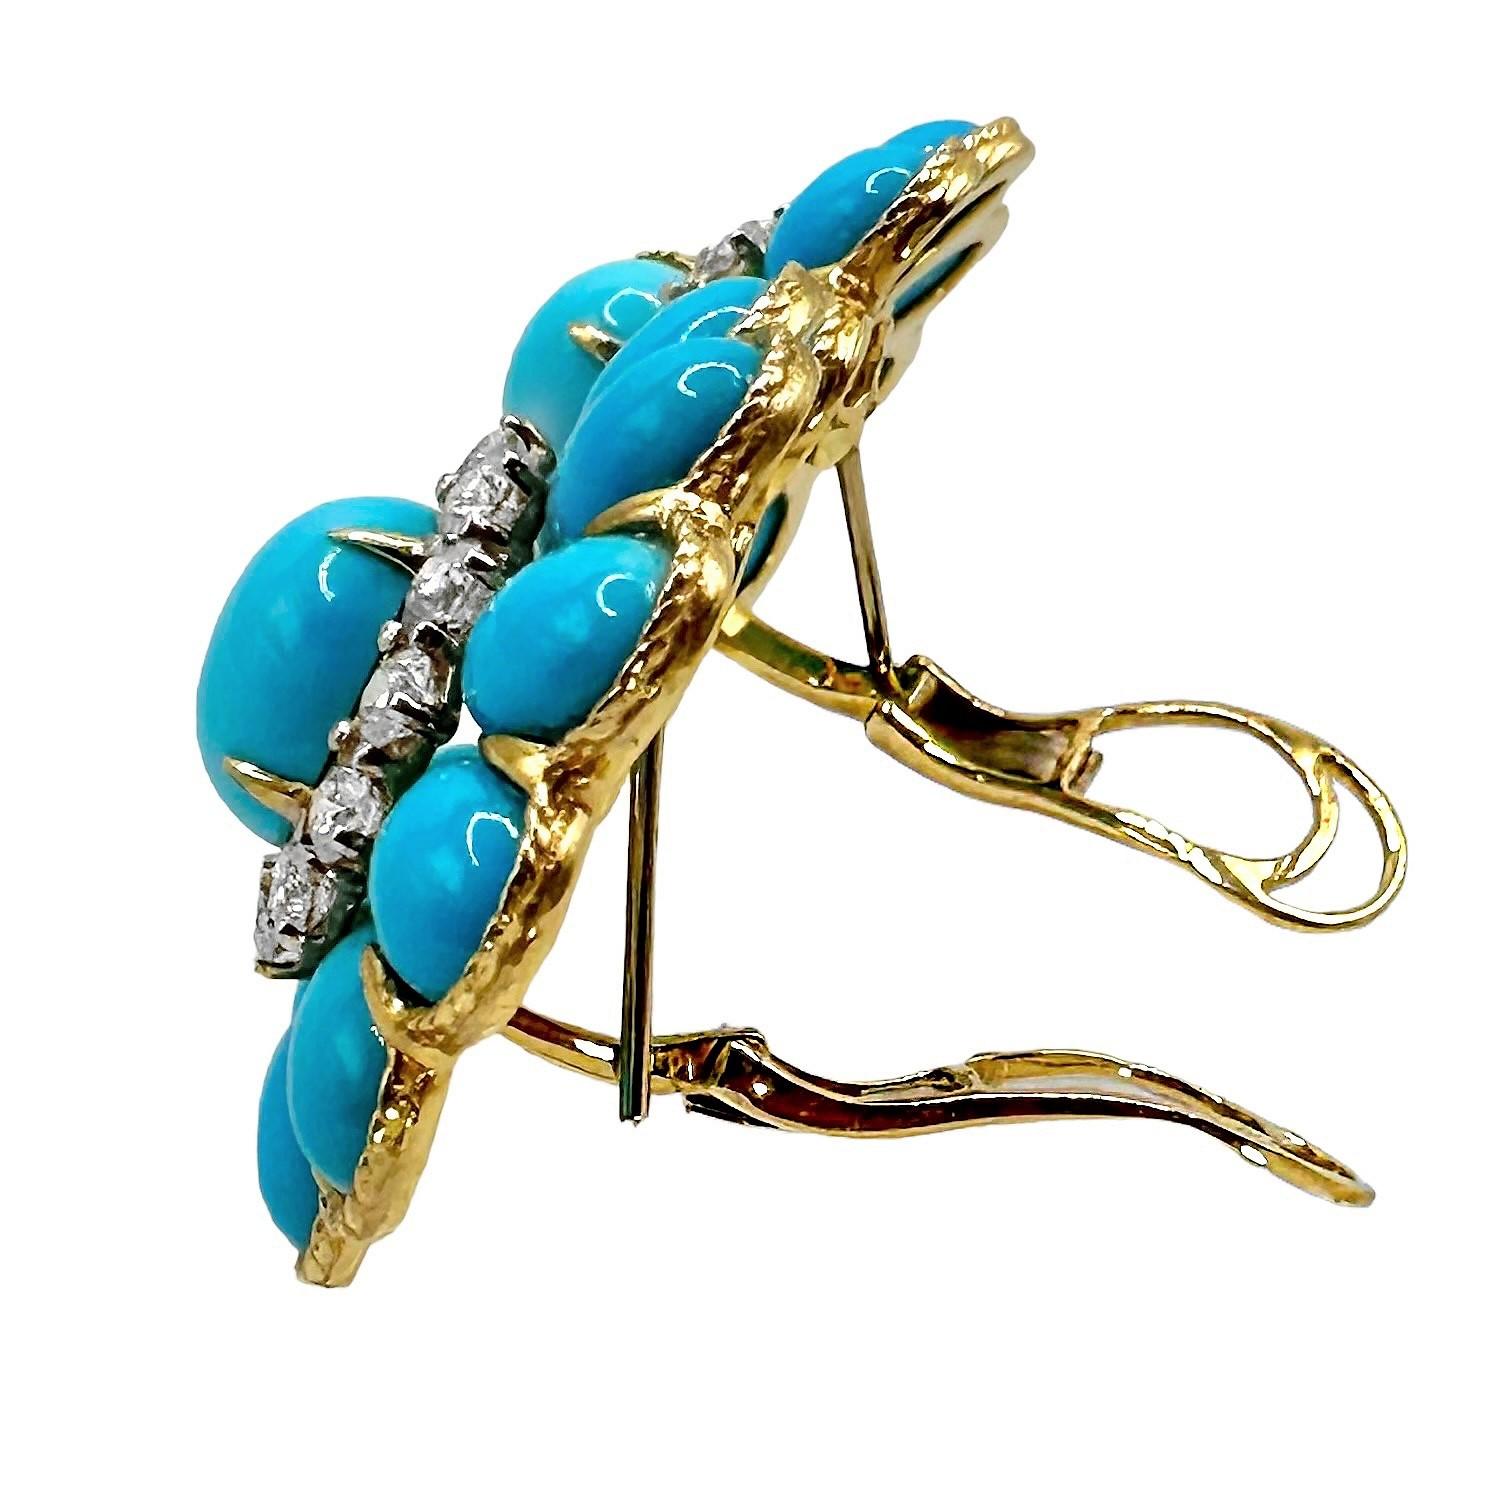 Striking 18K Yellow Gold Vintage Turquoise and Diamond Earrings For Sale 1